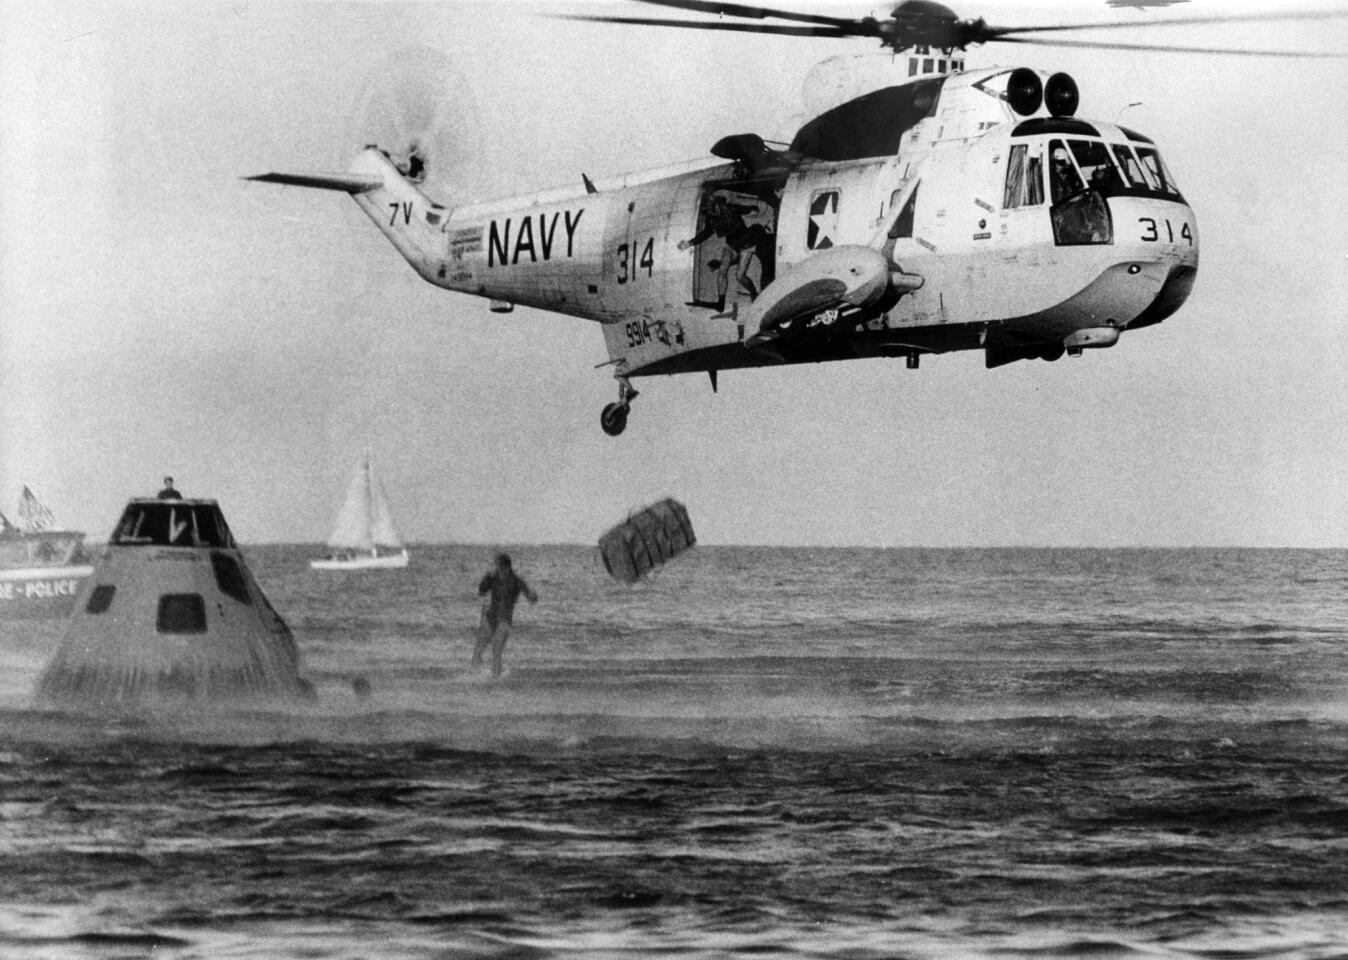 A Navy helicopter flies over a frogman during a simulation in Lake Michigan demonstrating how the frogmen recovered the Apollo 11 astronauts after splashdown in the Pacific Ocean. A replica of the Apollo 11 capsule floats in Lake Michigan as the helicopter makes the pickup on Aug. 22, 1969. The frogman is pulled up to the helicopter to complete the simulation.